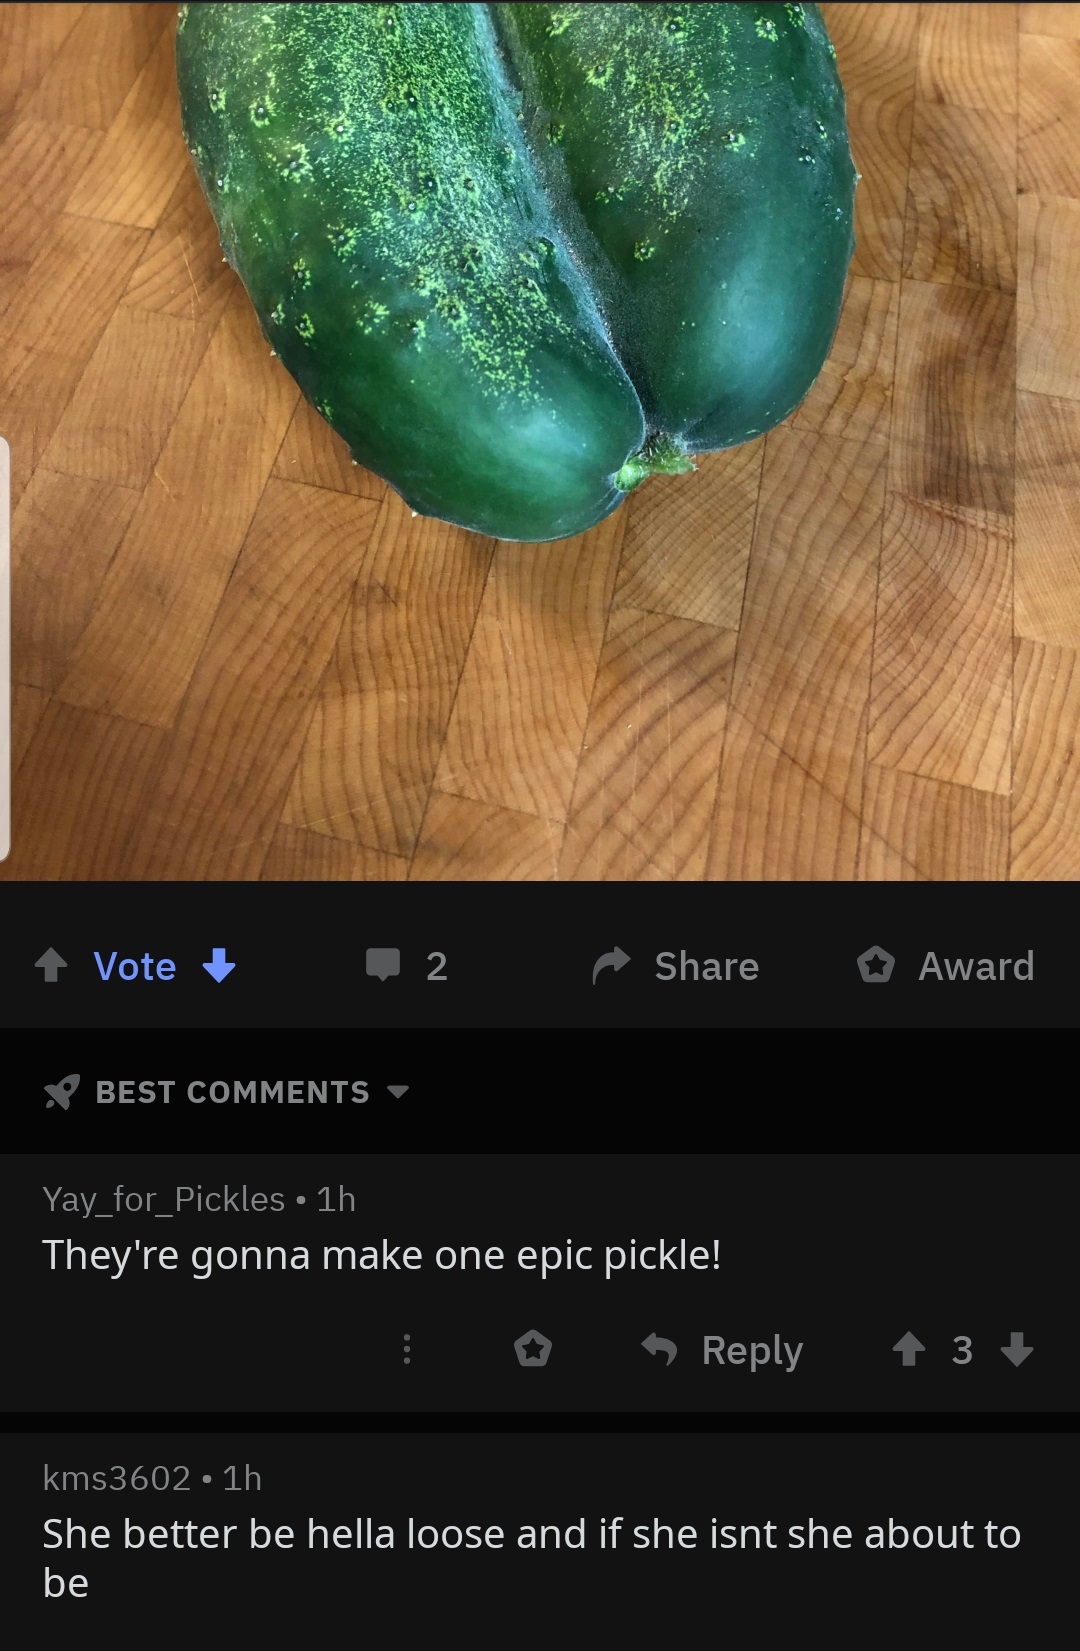 close up - Vote 2 Award Best Yay_for_Picklesih They're gonna make one epic pickle! 0 3 kms3602.11 She better be hella loose and if she isnt she about to be